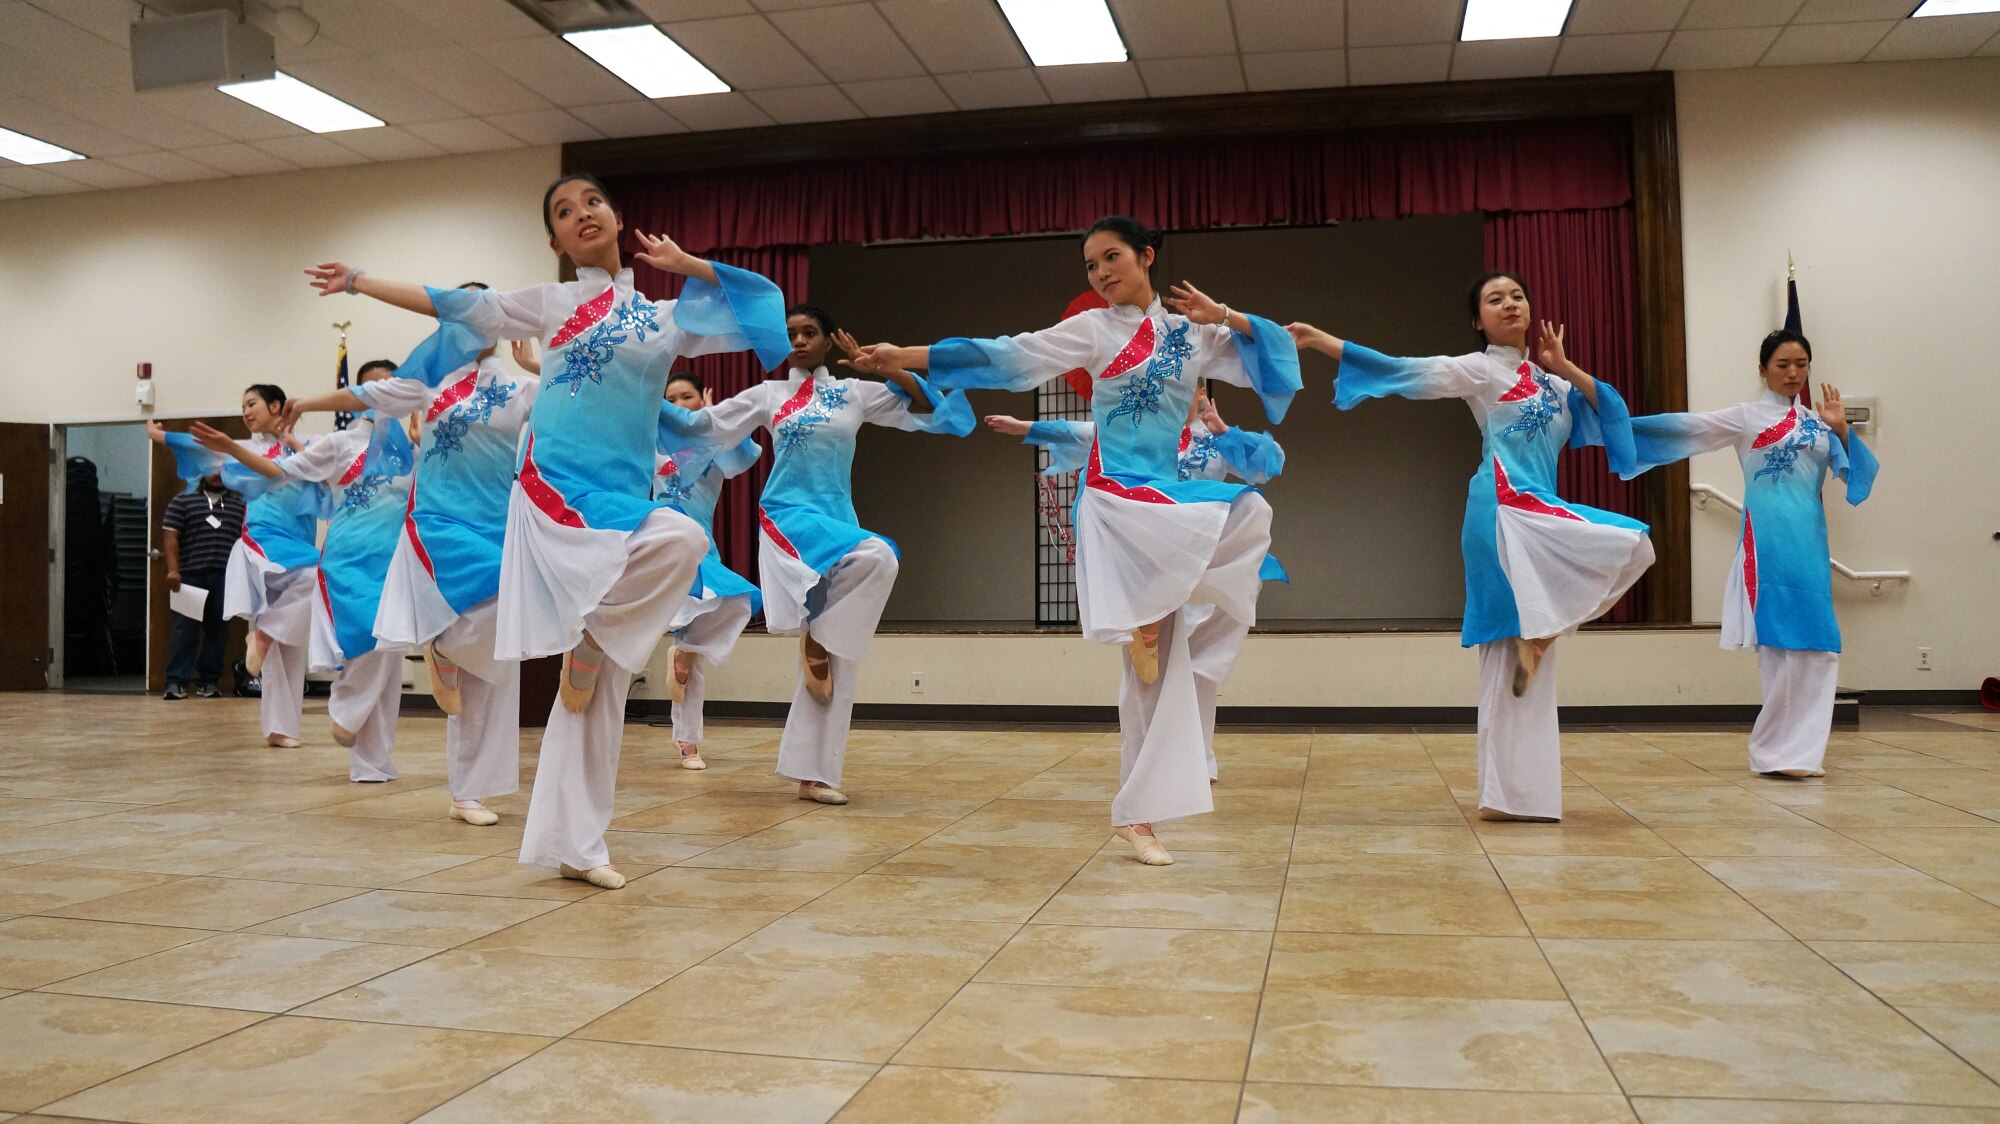 Dancers perform during the 2016 Asian Pacific Gala April 30. The event included traditional and modern fashion, martial arts demonstrations, food, music and more. (U.S. Air Force photo by Ed Aspera)